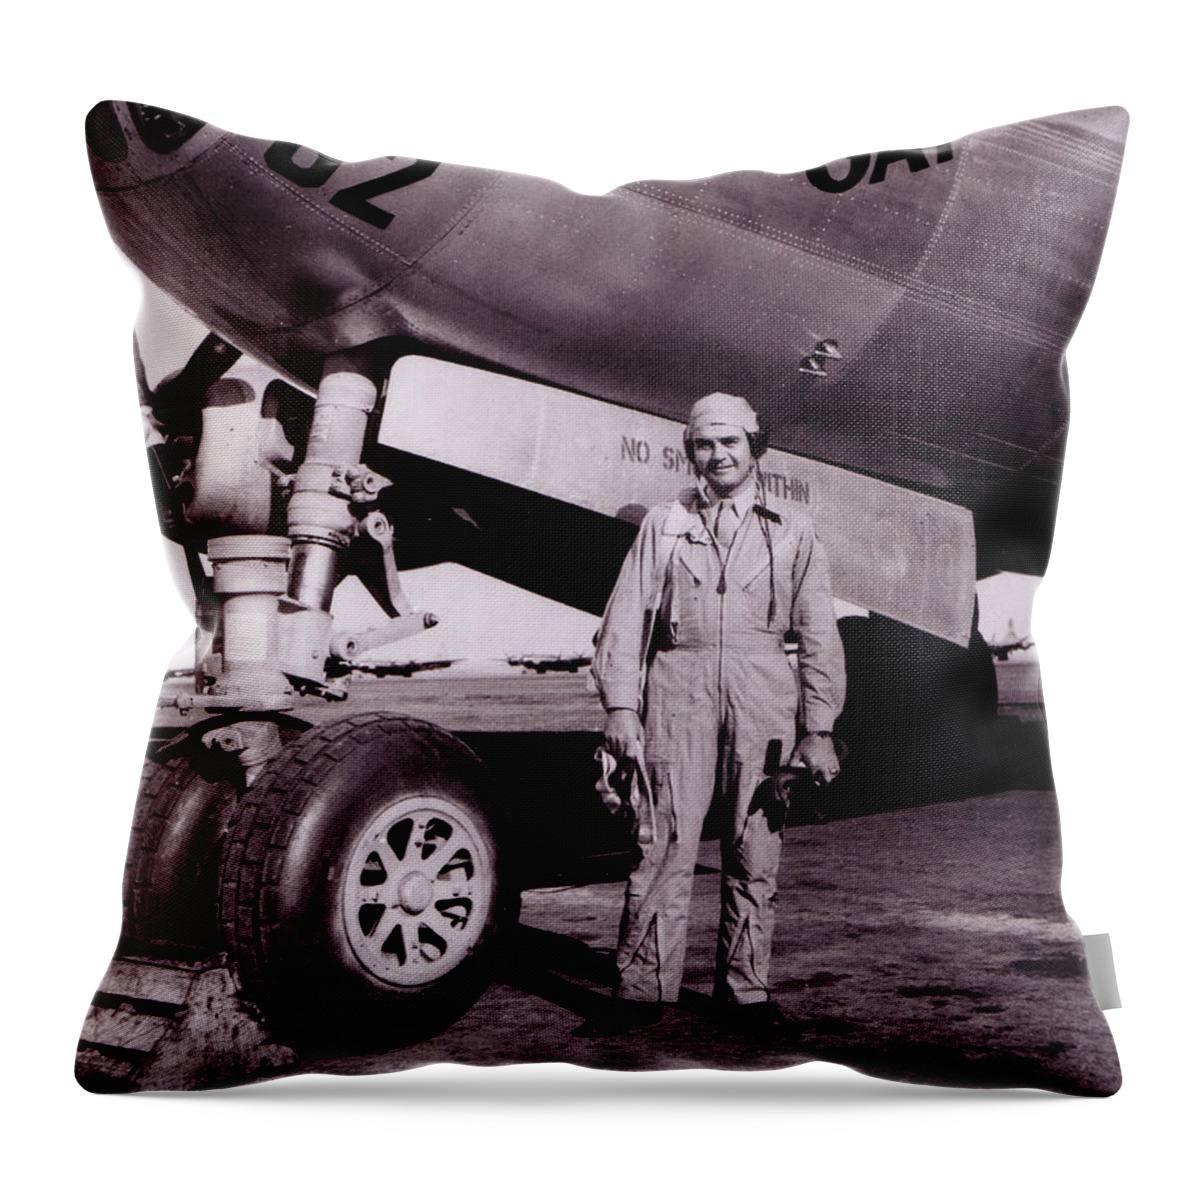 Science Throw Pillow featuring the photograph Wwii, Paul Tibbetts, Usaf Officer by Science Source